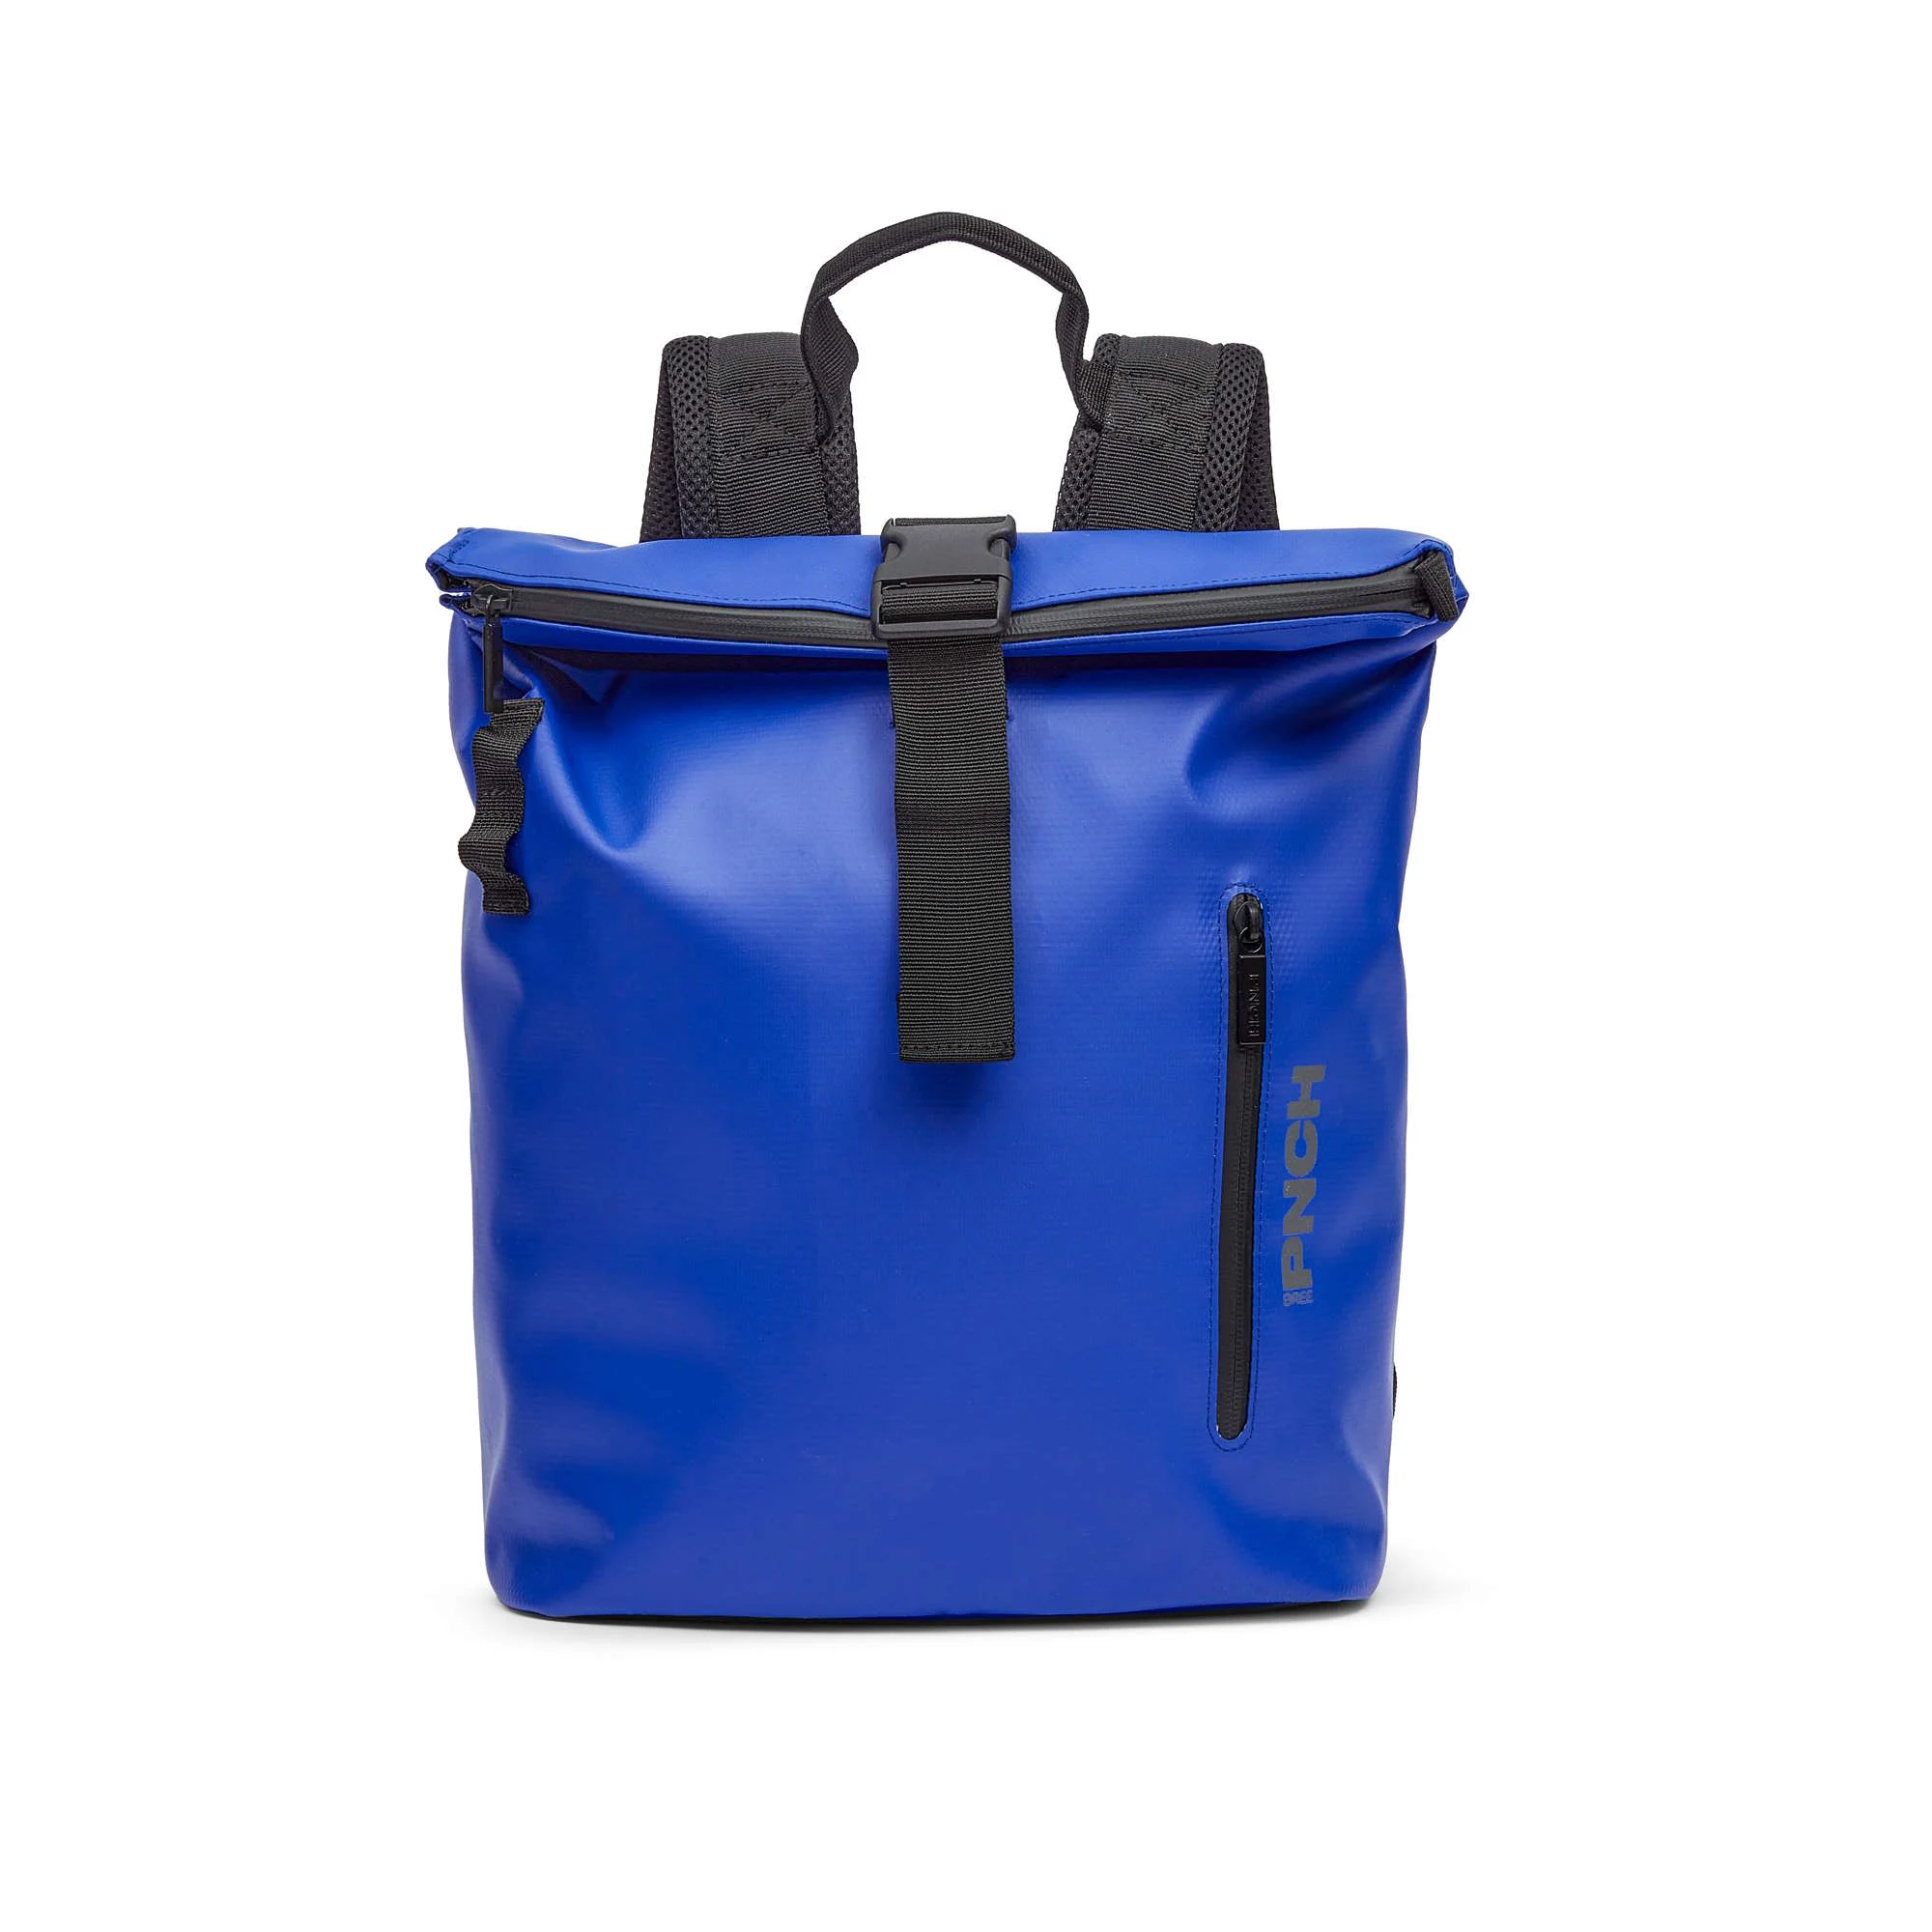 BREE PNCH 712 Rucksack - space blue